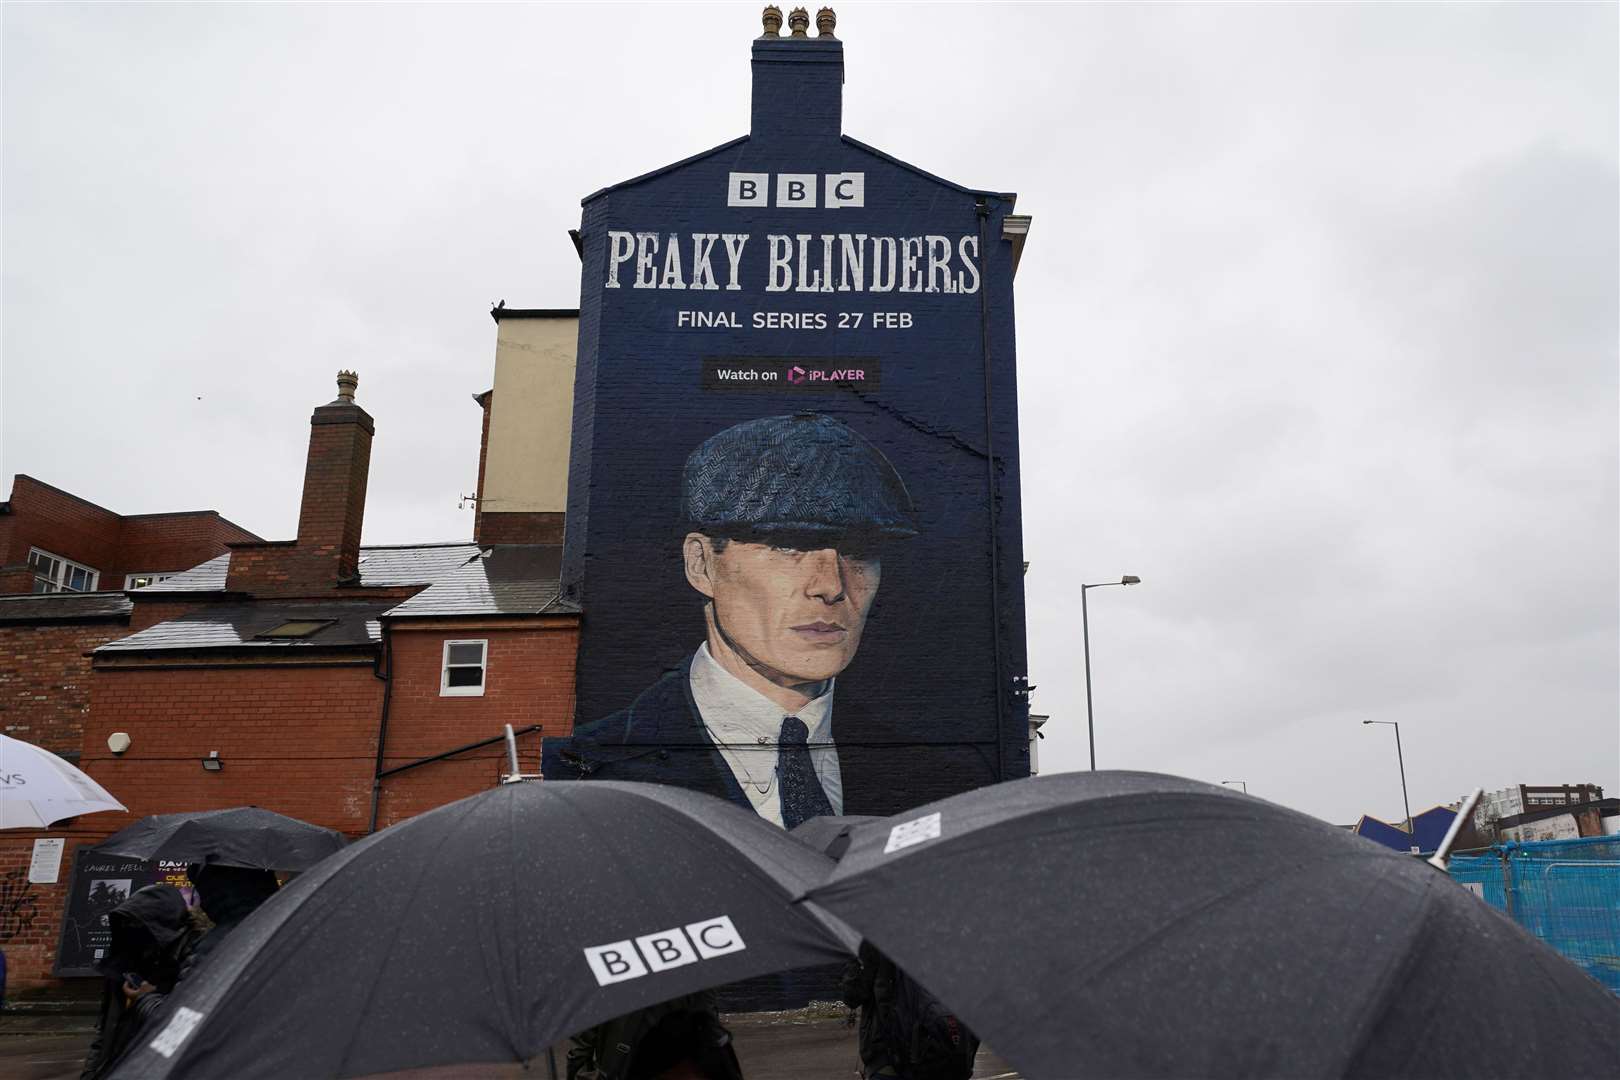 A mural by artist Akse P19 of actor Cillian Murphy as Peaky Blinders crime boss Tommy Shelby in the historic Deritend area of Birmingham (Jacob King/PA)